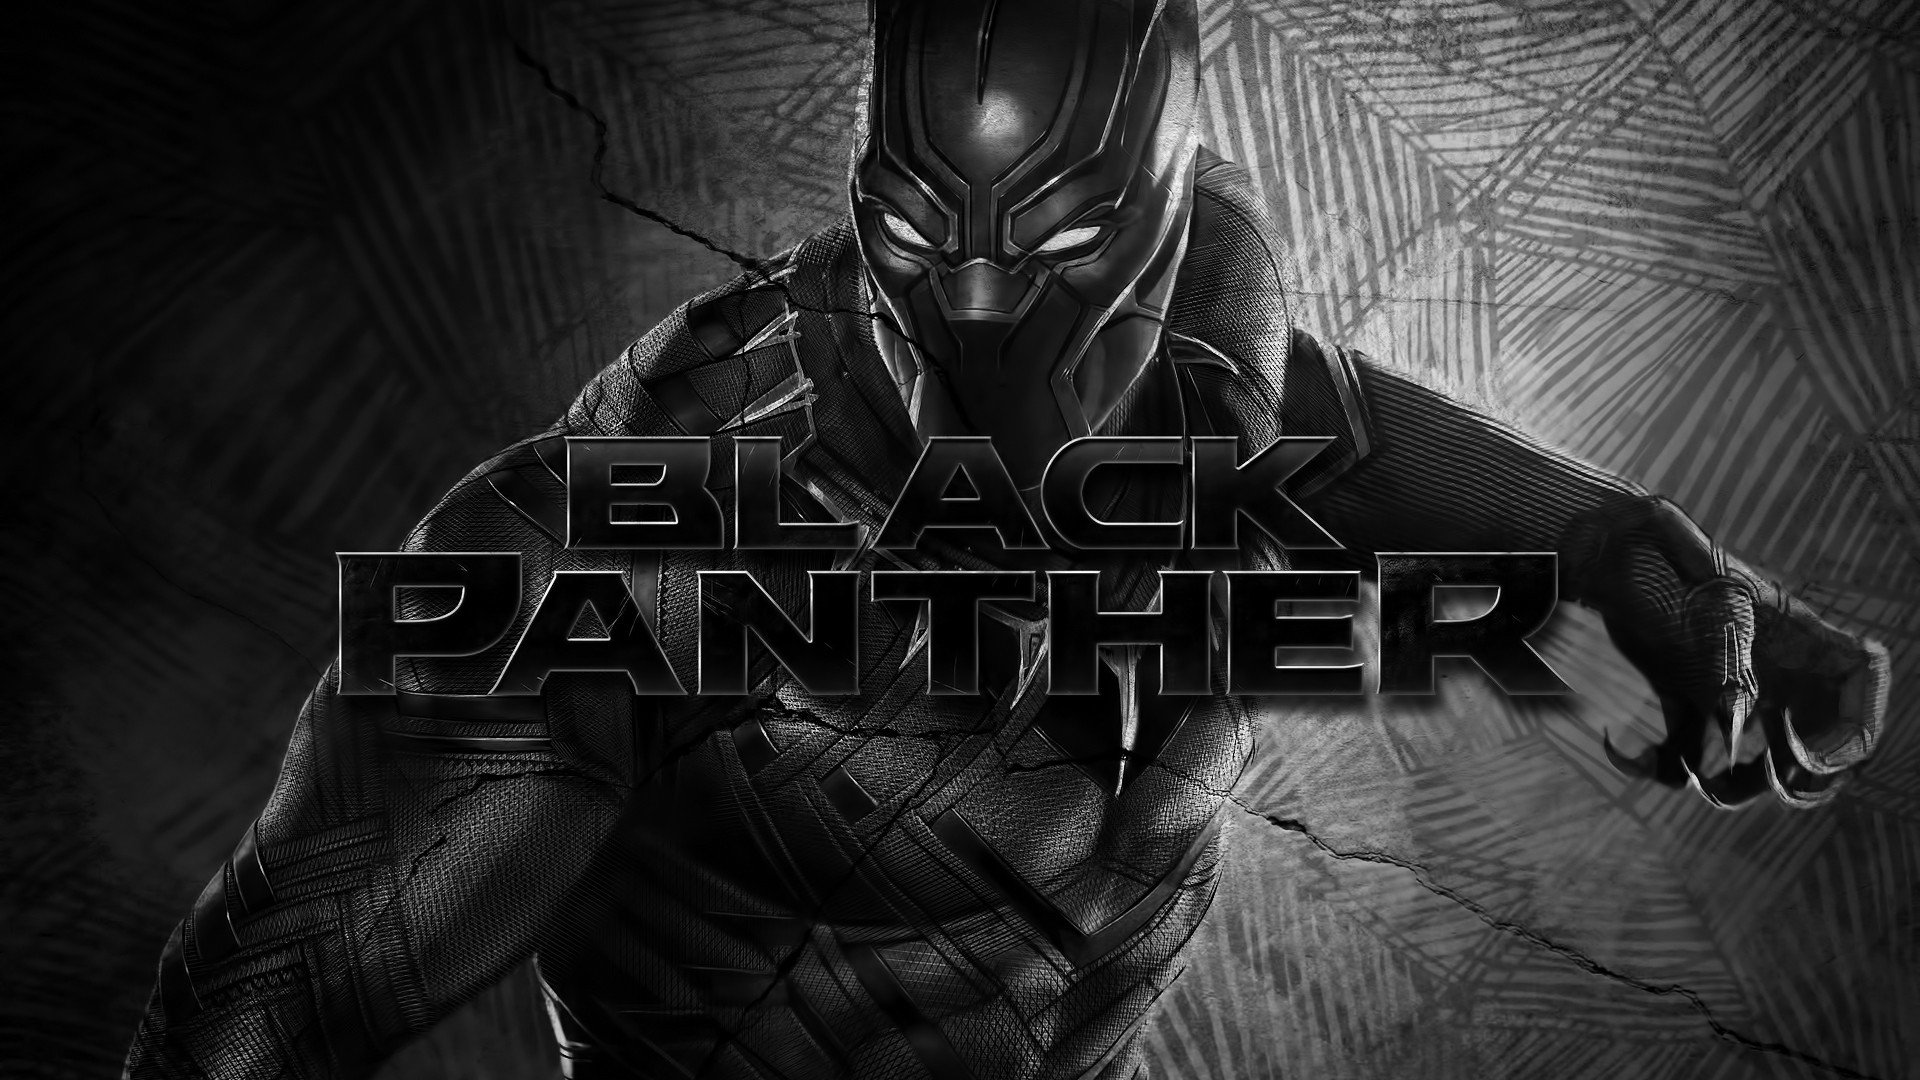 black panther hd wallpaper,action adventure game,pc game,batman,fictional character,adventure game